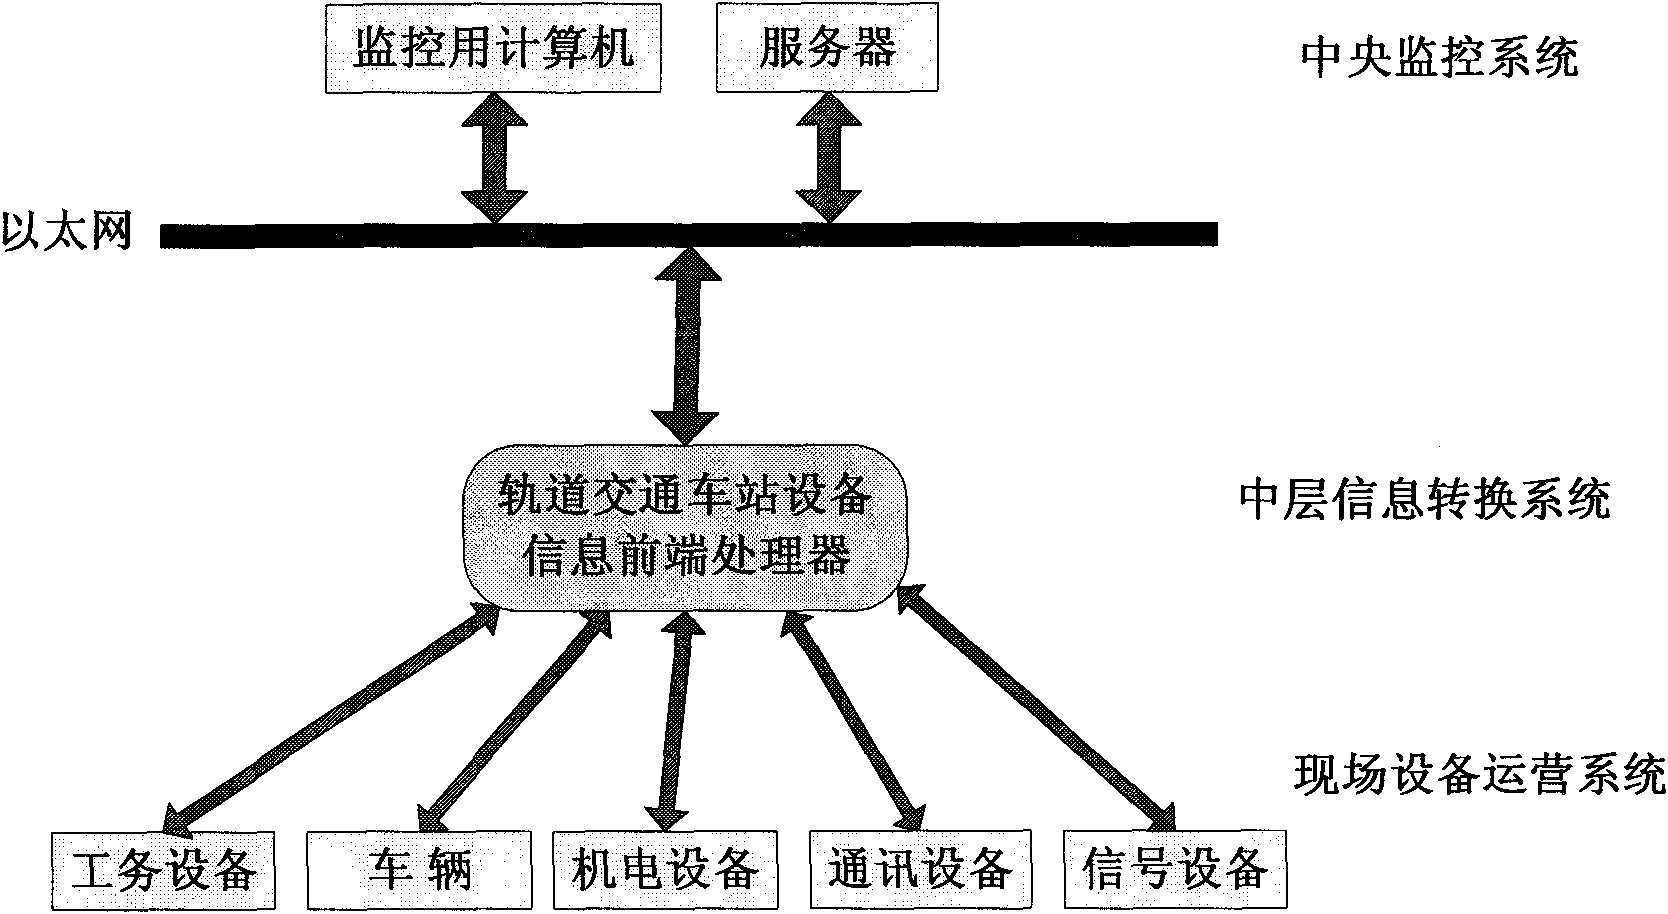 Front-end processor of rail transit station equipment information based on embedded technology and method